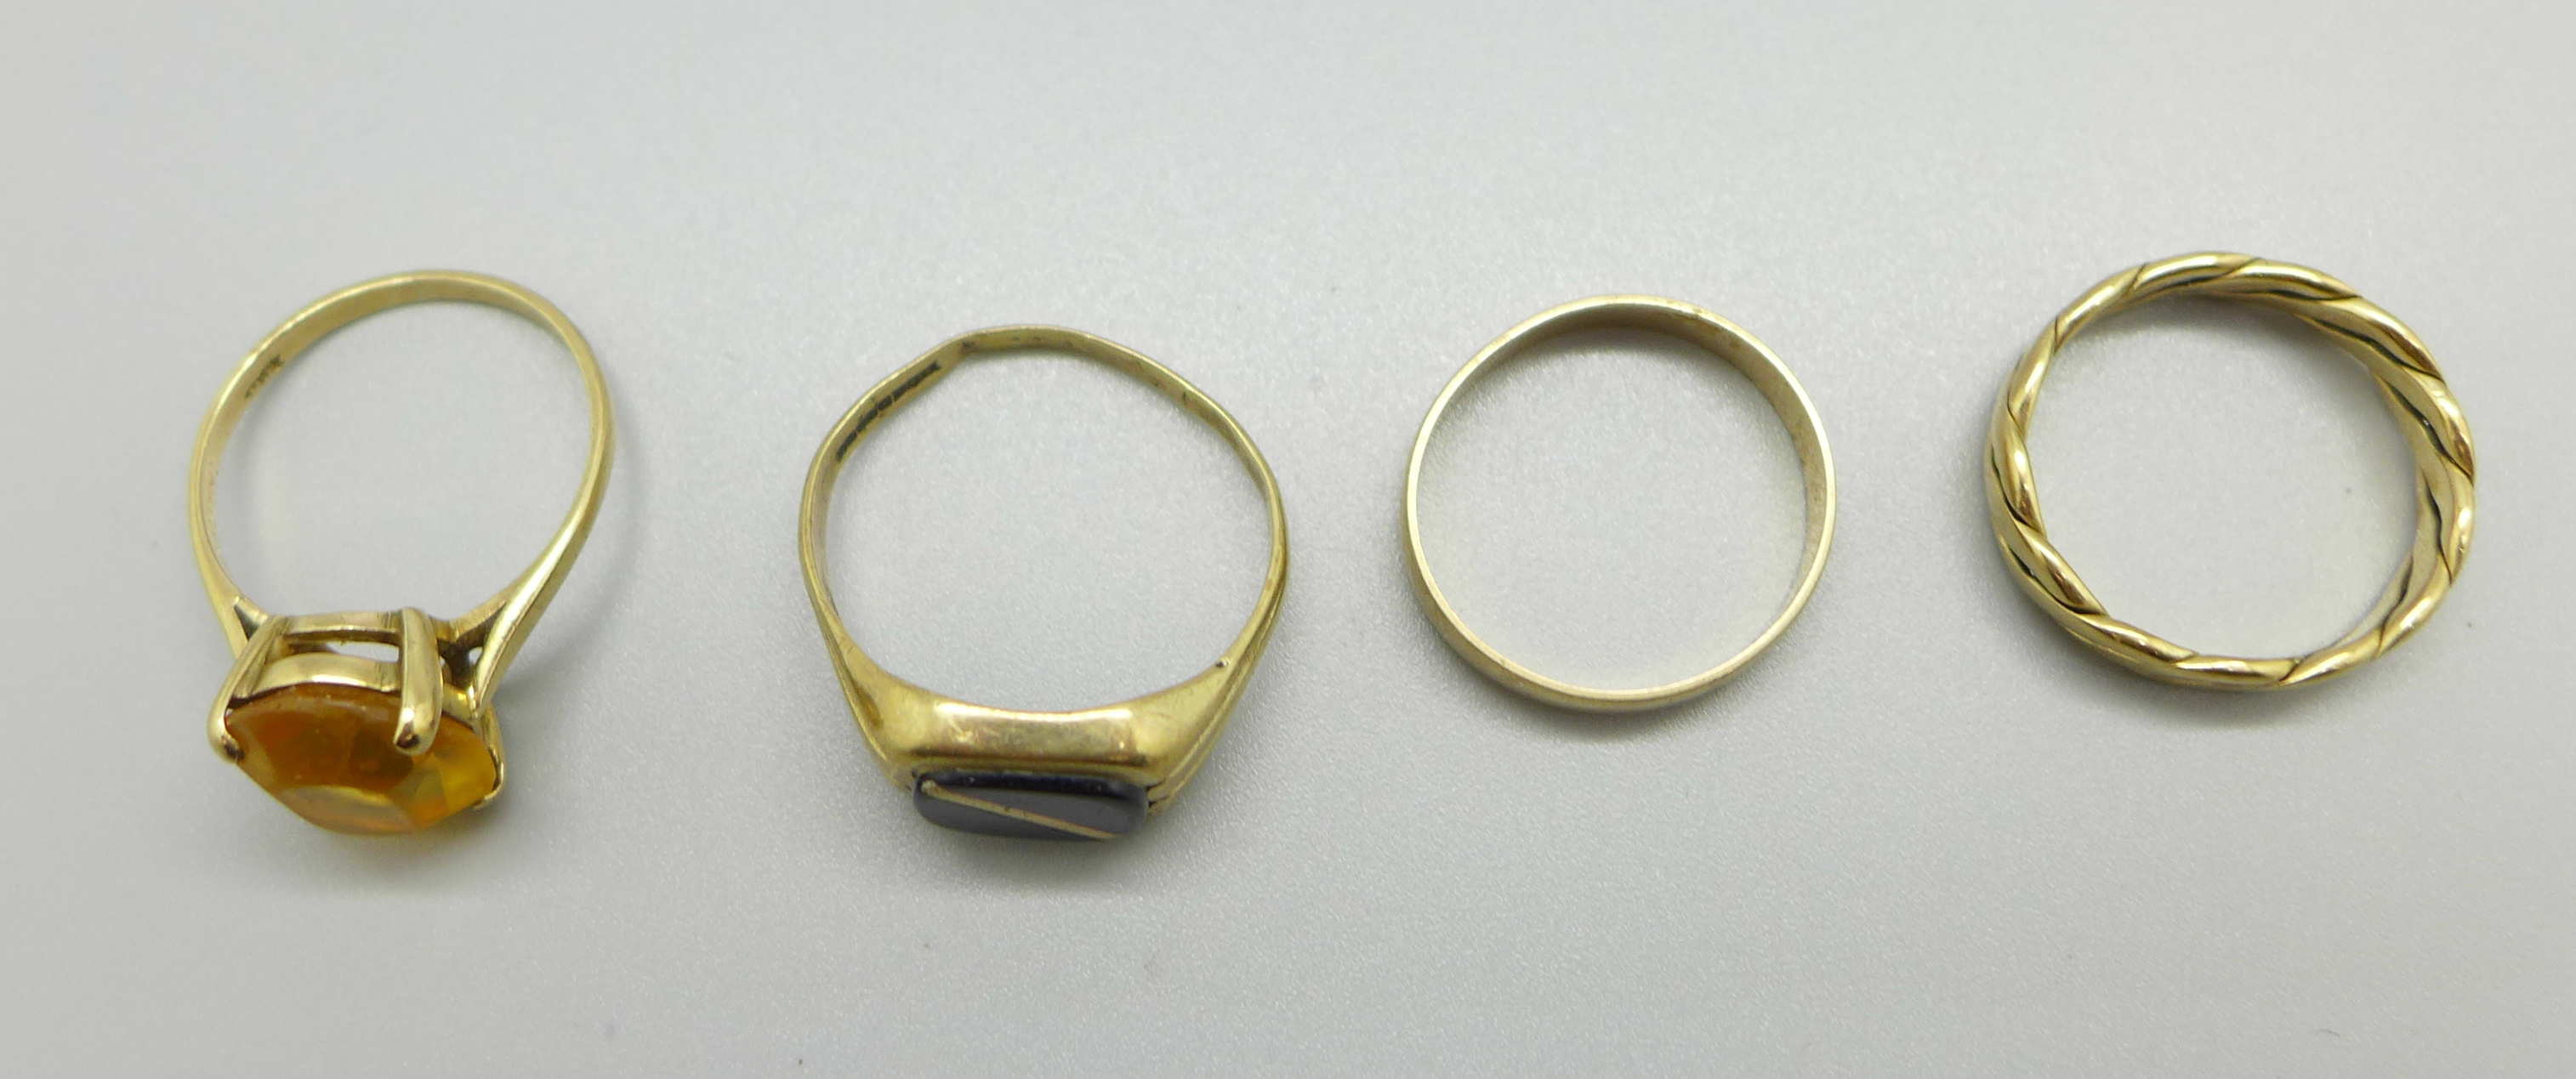 Four 9ct gold rings, total weight 9.5g - Image 3 of 4